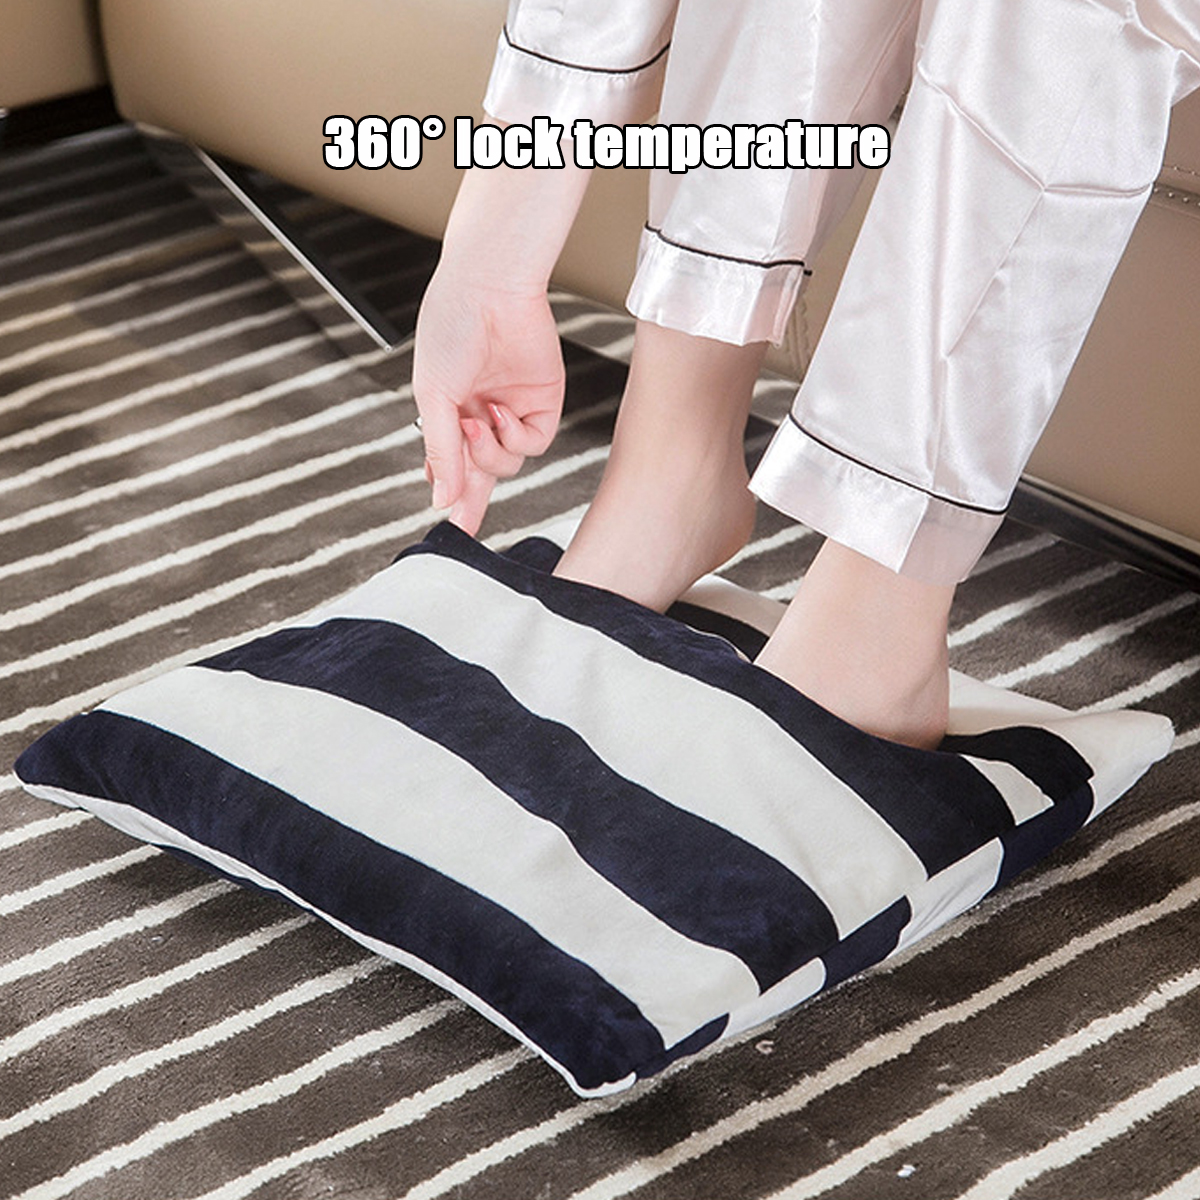 220V-Electric-Foot-Hand-Warmer-Heater-Heating-Pad-7-Speed-Stepless-Temperature-Winter-Sofa-Chair-War-1623876-7